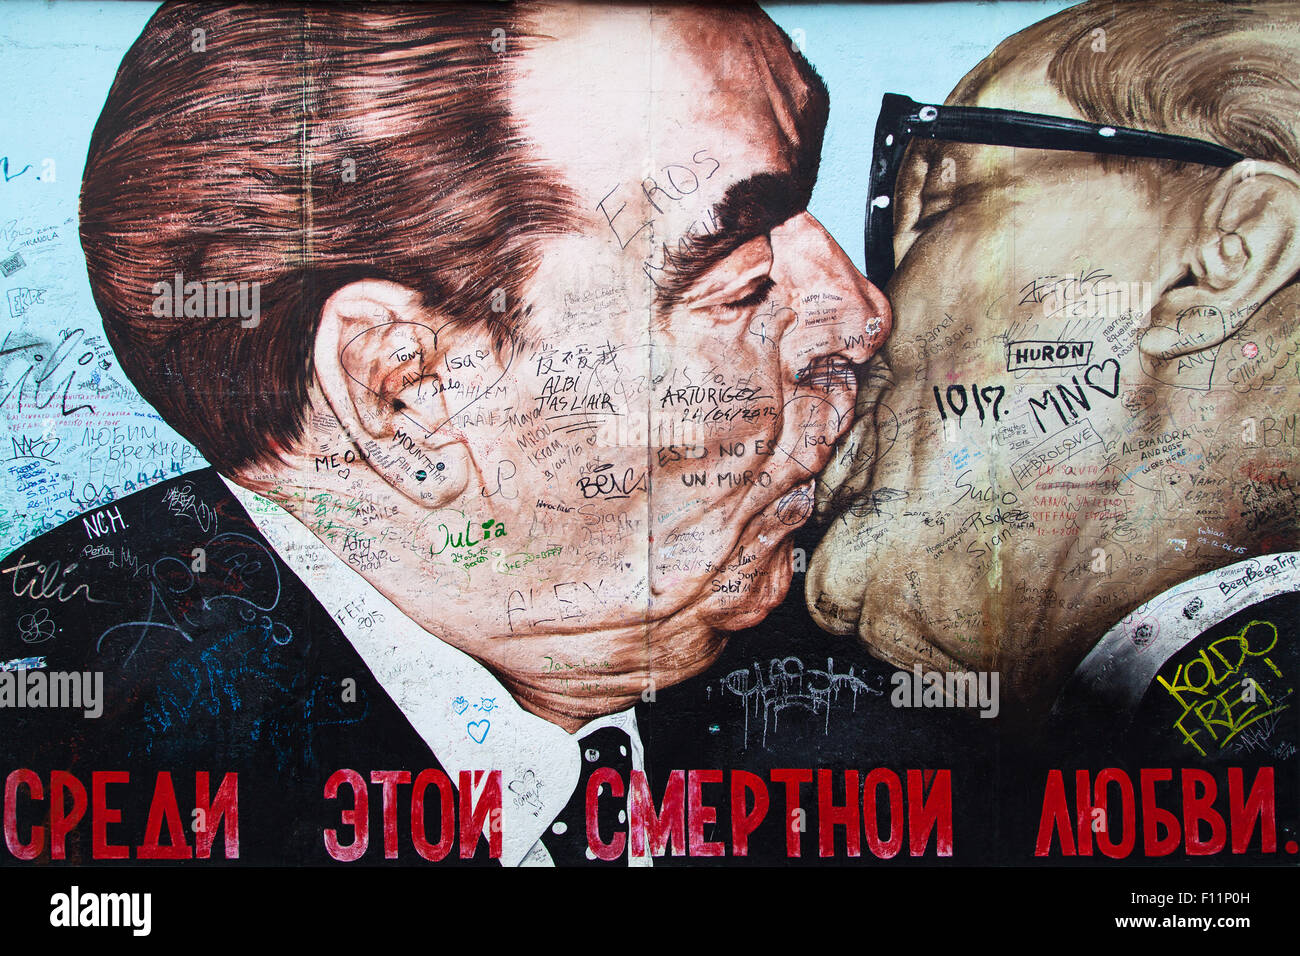 Brotherhood Kiss by Dmitri Vrubel on the East Side Gallery in Berlin, Germany. Stock Photo